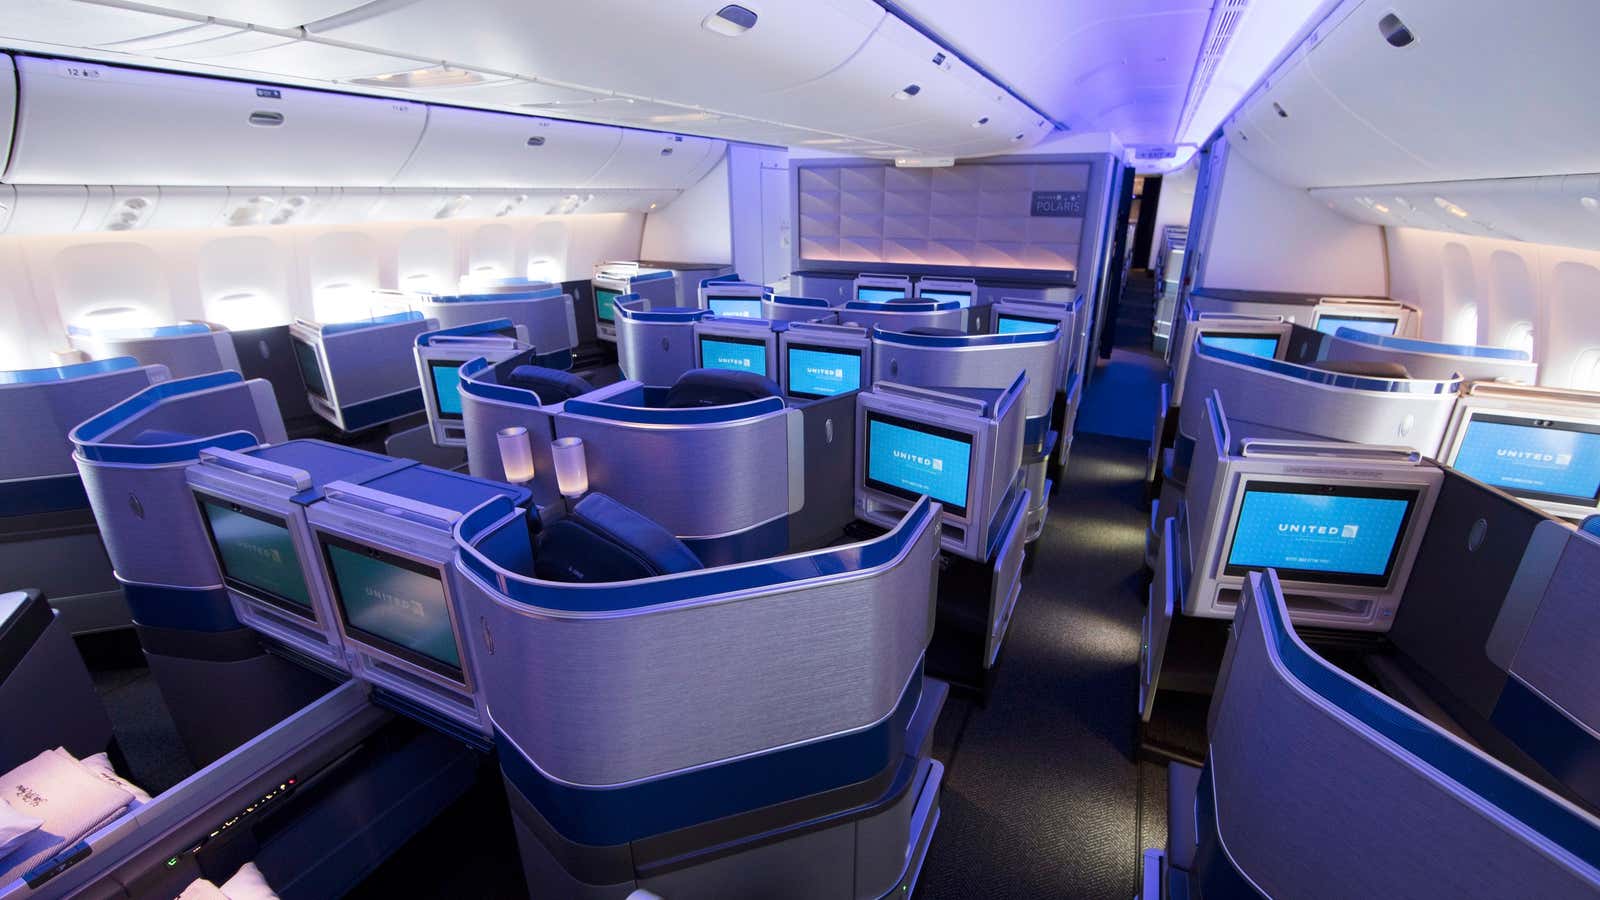 The mystery behind United’s secret, ultra-elite airline status